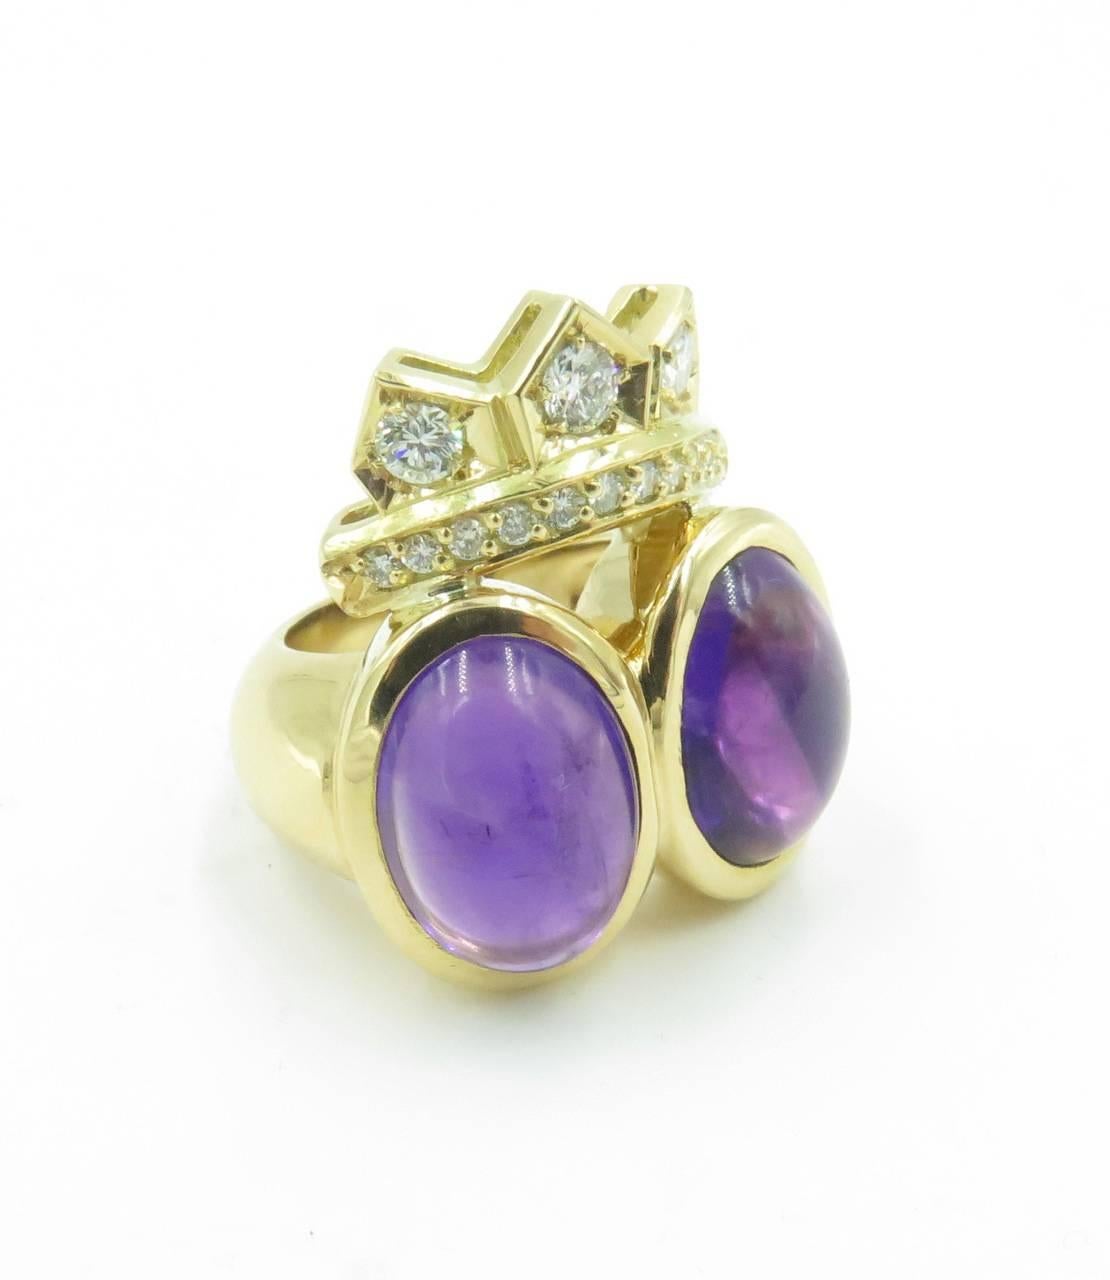 An 18 karat yellow gold, amethyst and diamond ring.  Centering two (2) oval amethyst cabochons, weighing approximately 18.35 carats total, enhanced at the top by a crown motif, set with circular-cut diamonds.  Fourteen (14) diamonds weigh